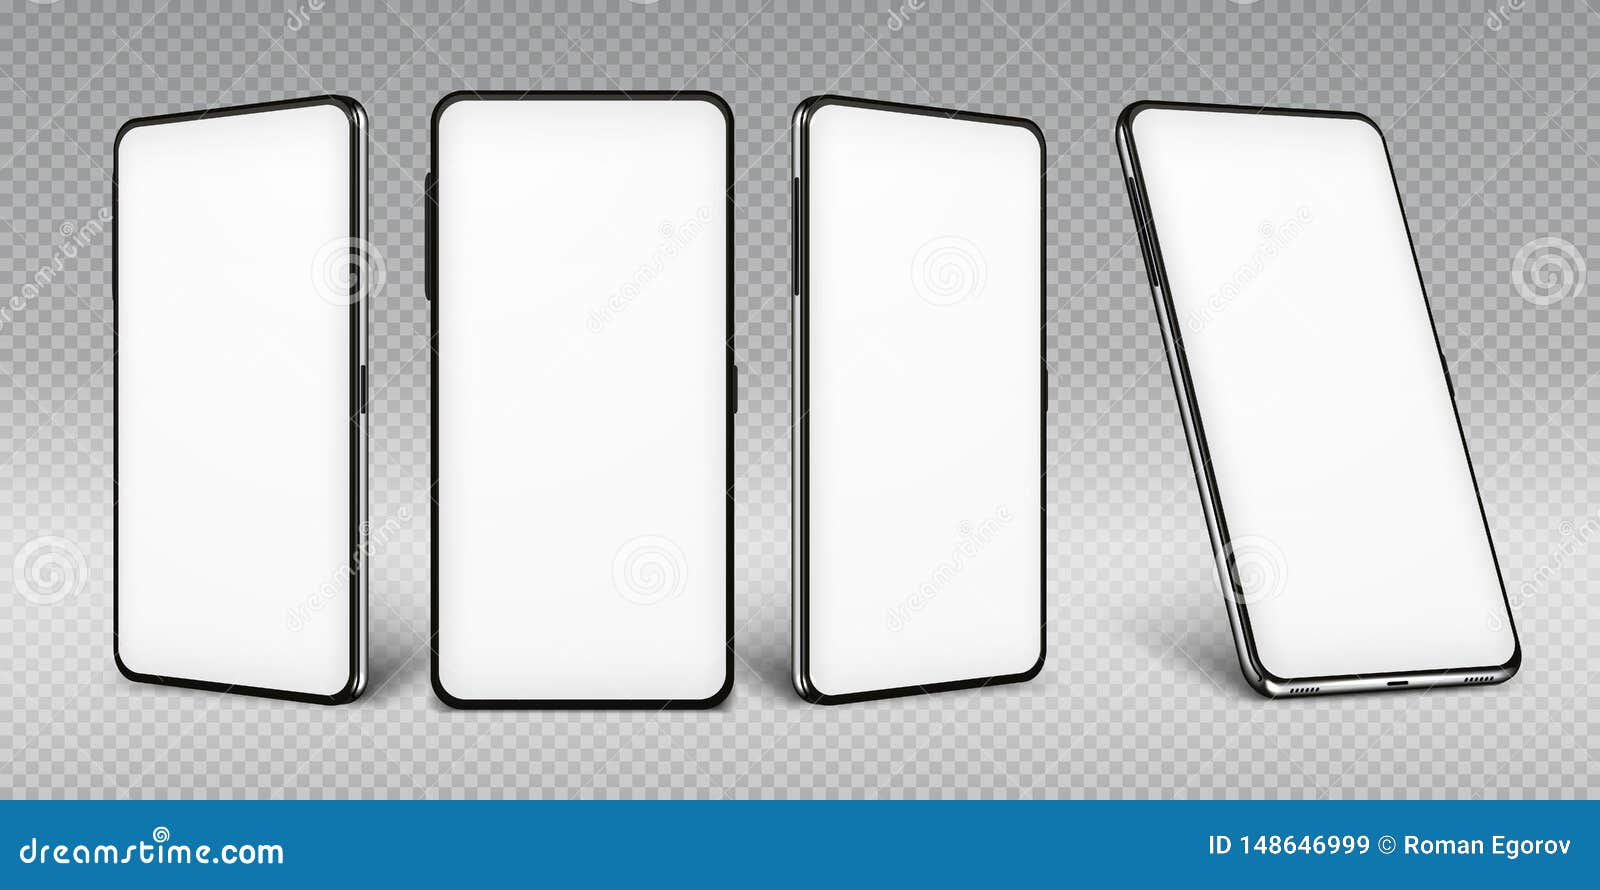 realistic smartphone mockup. cellphone frame with blank display  templates, phone different views.  mobile